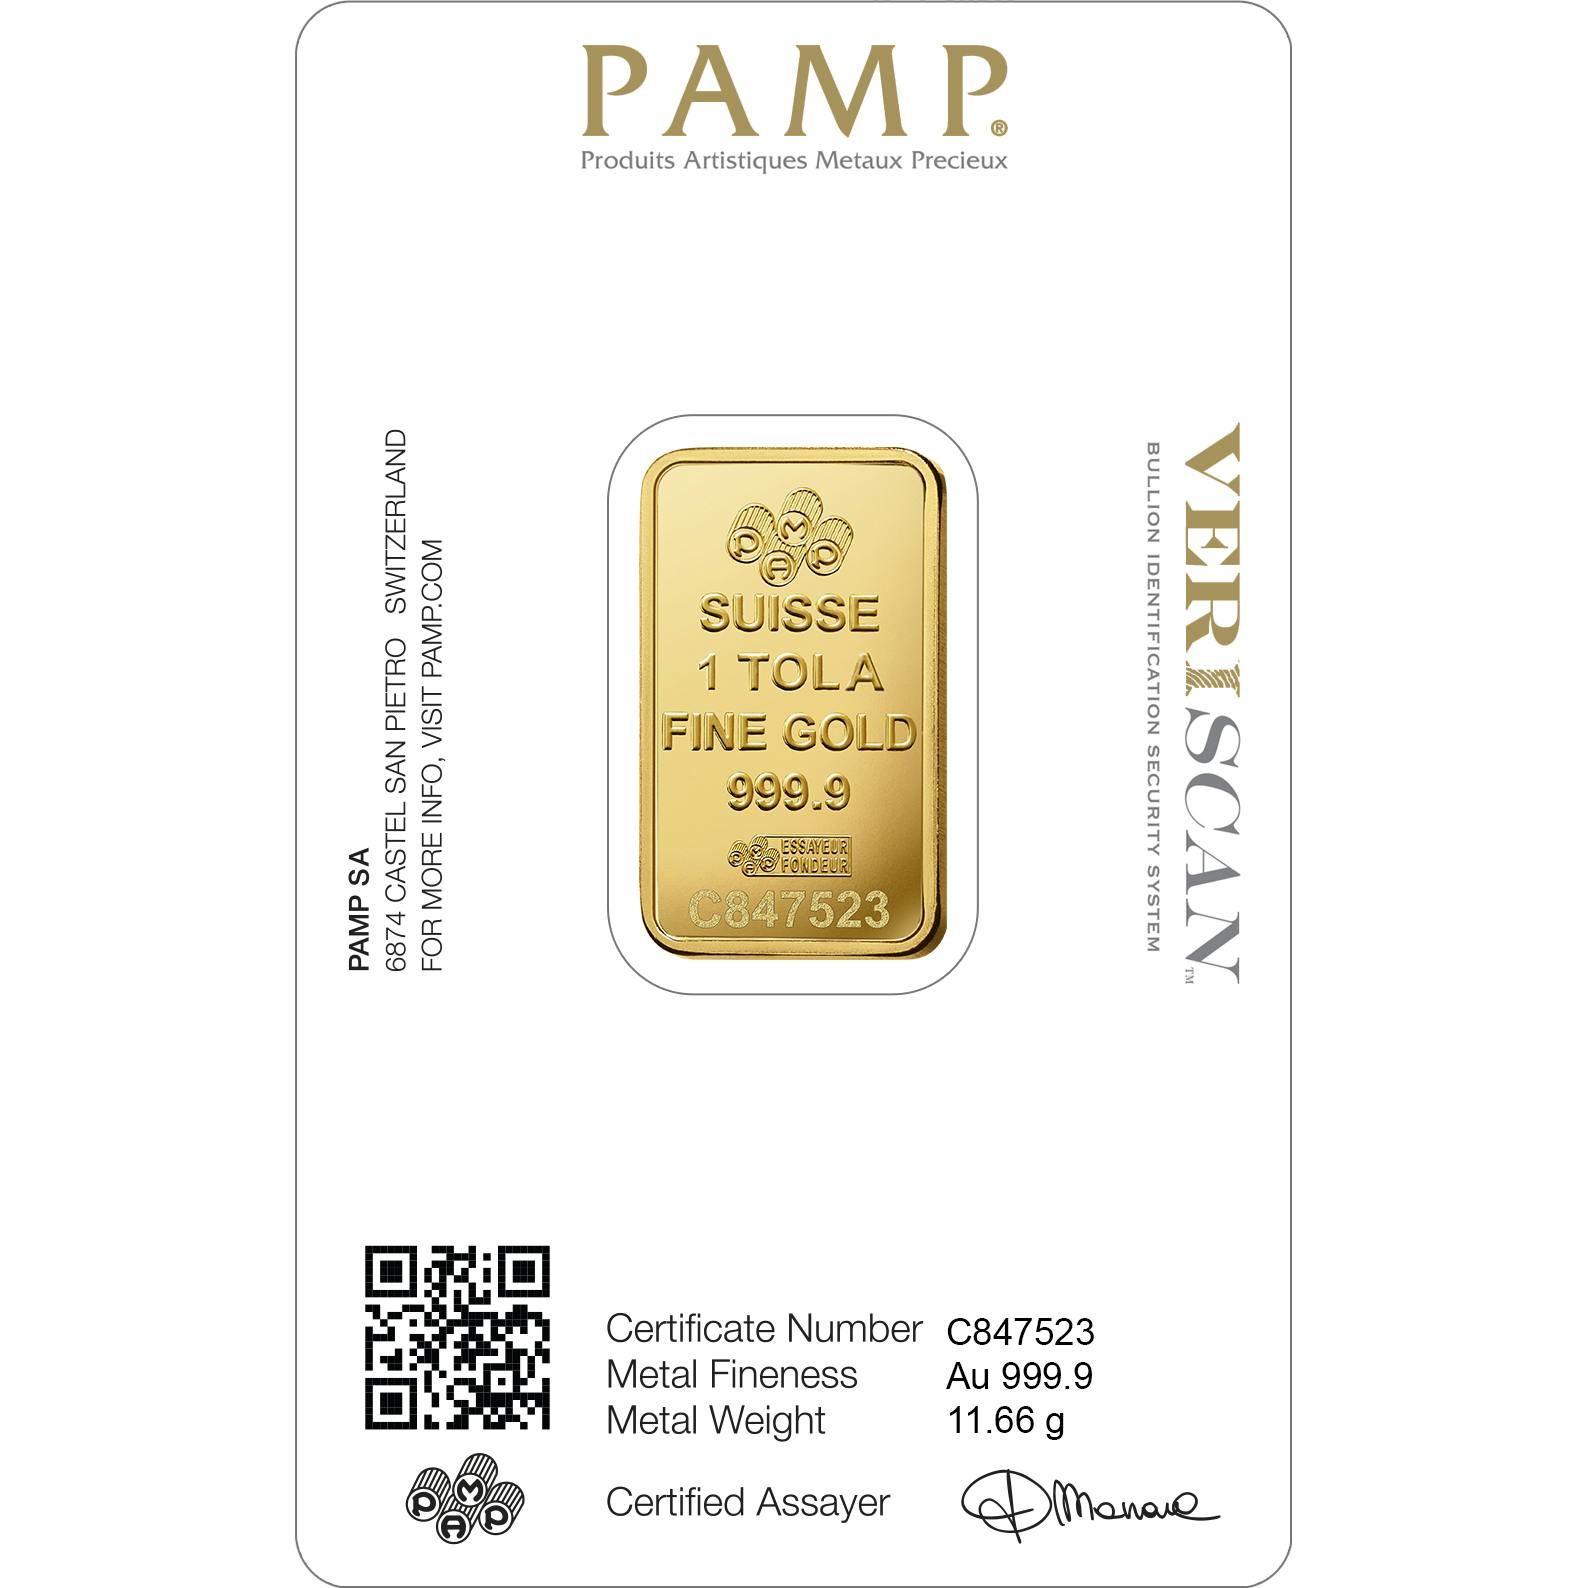 Invest in 1 tolas Fine Gold Lady Fortuna - PAMP Swiss - Back Veriscan